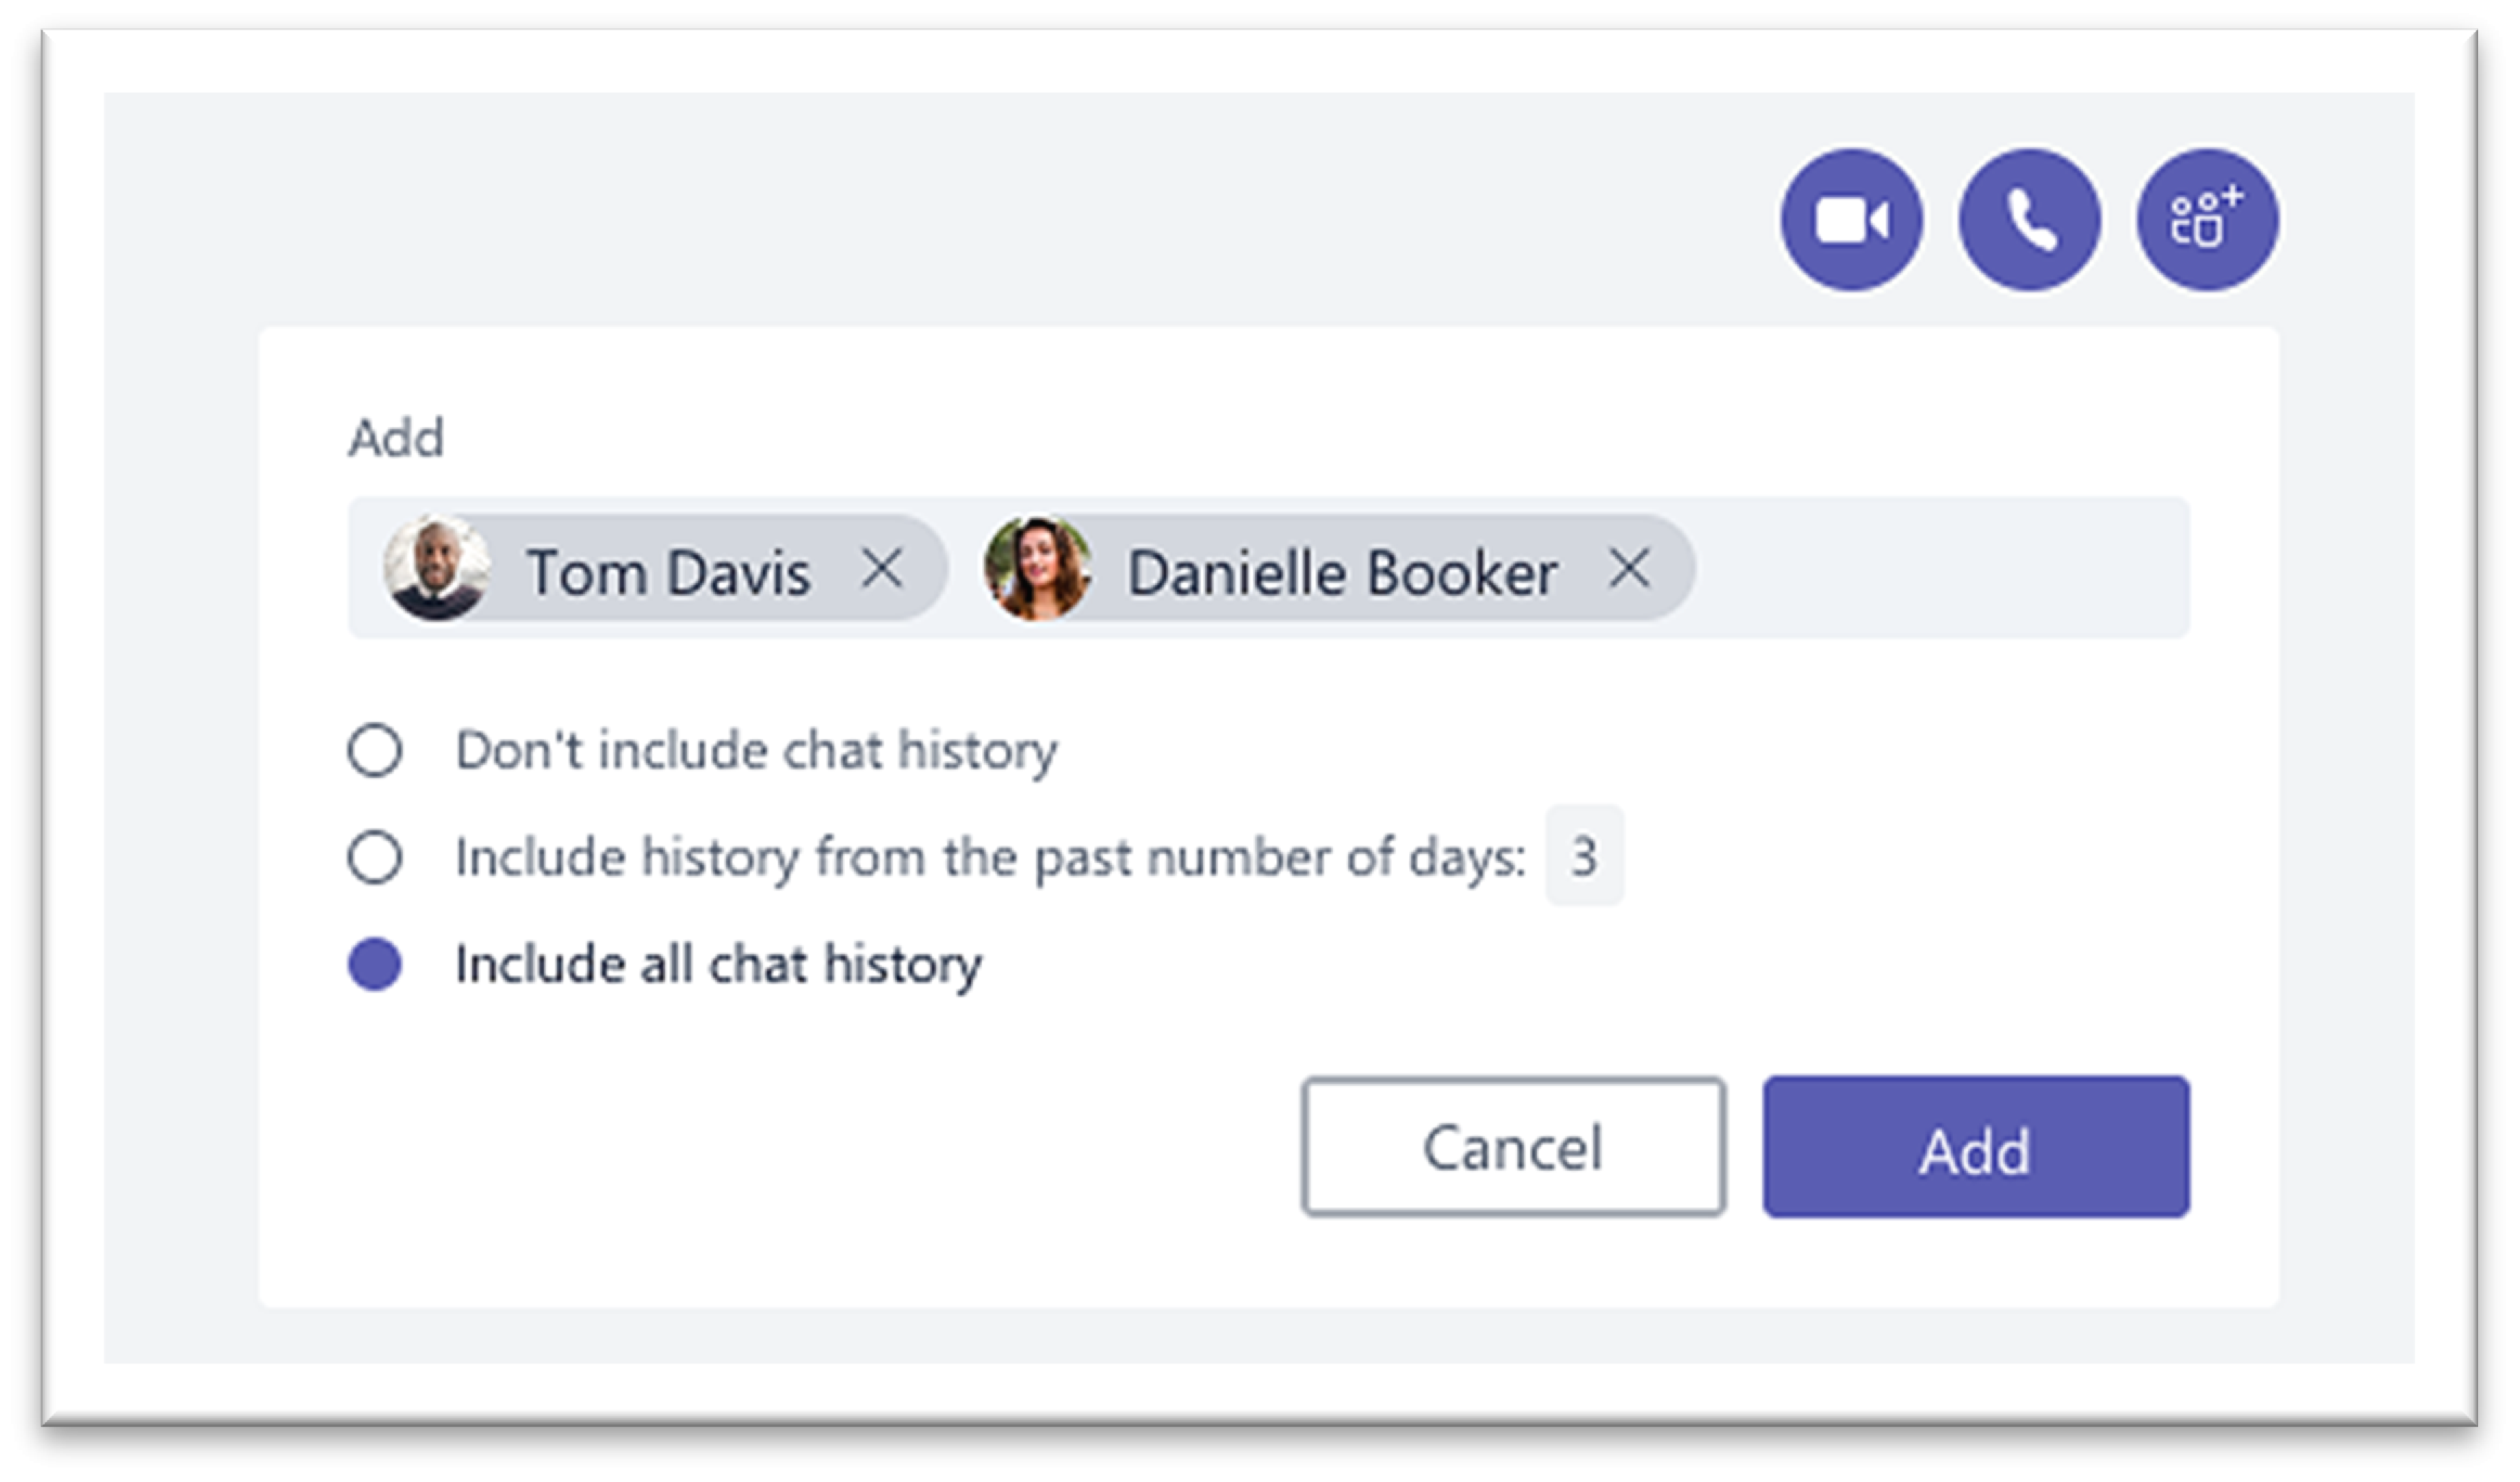 Screenshot showing the page on which you can add people to the conversation